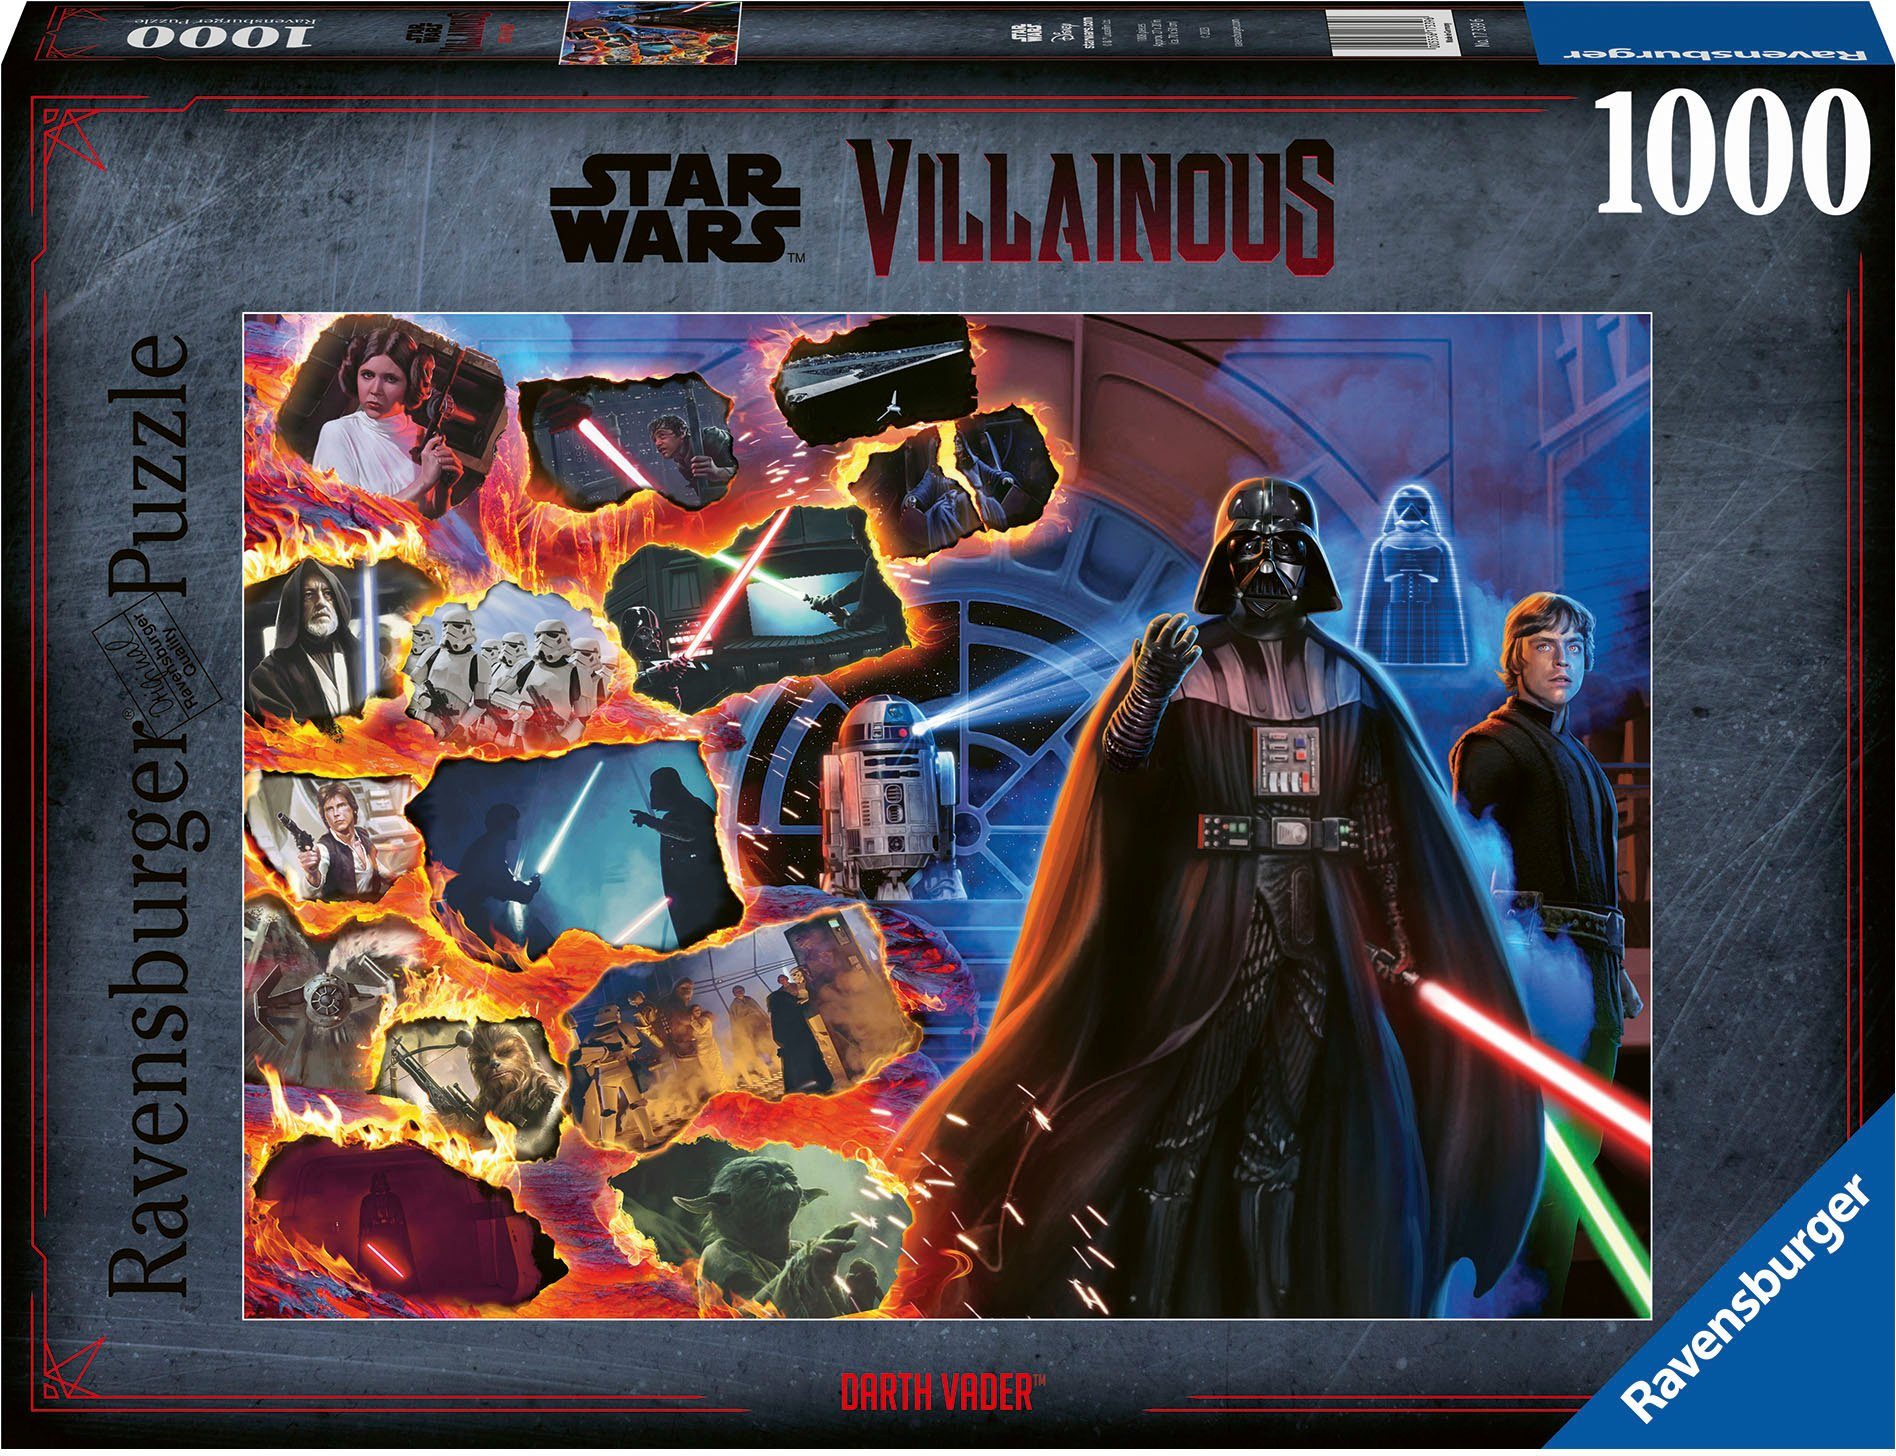 Ravensburger Puzzle Star Wars Made Puzzleteile, in 1000 Vader, Villainous, Germany Darth